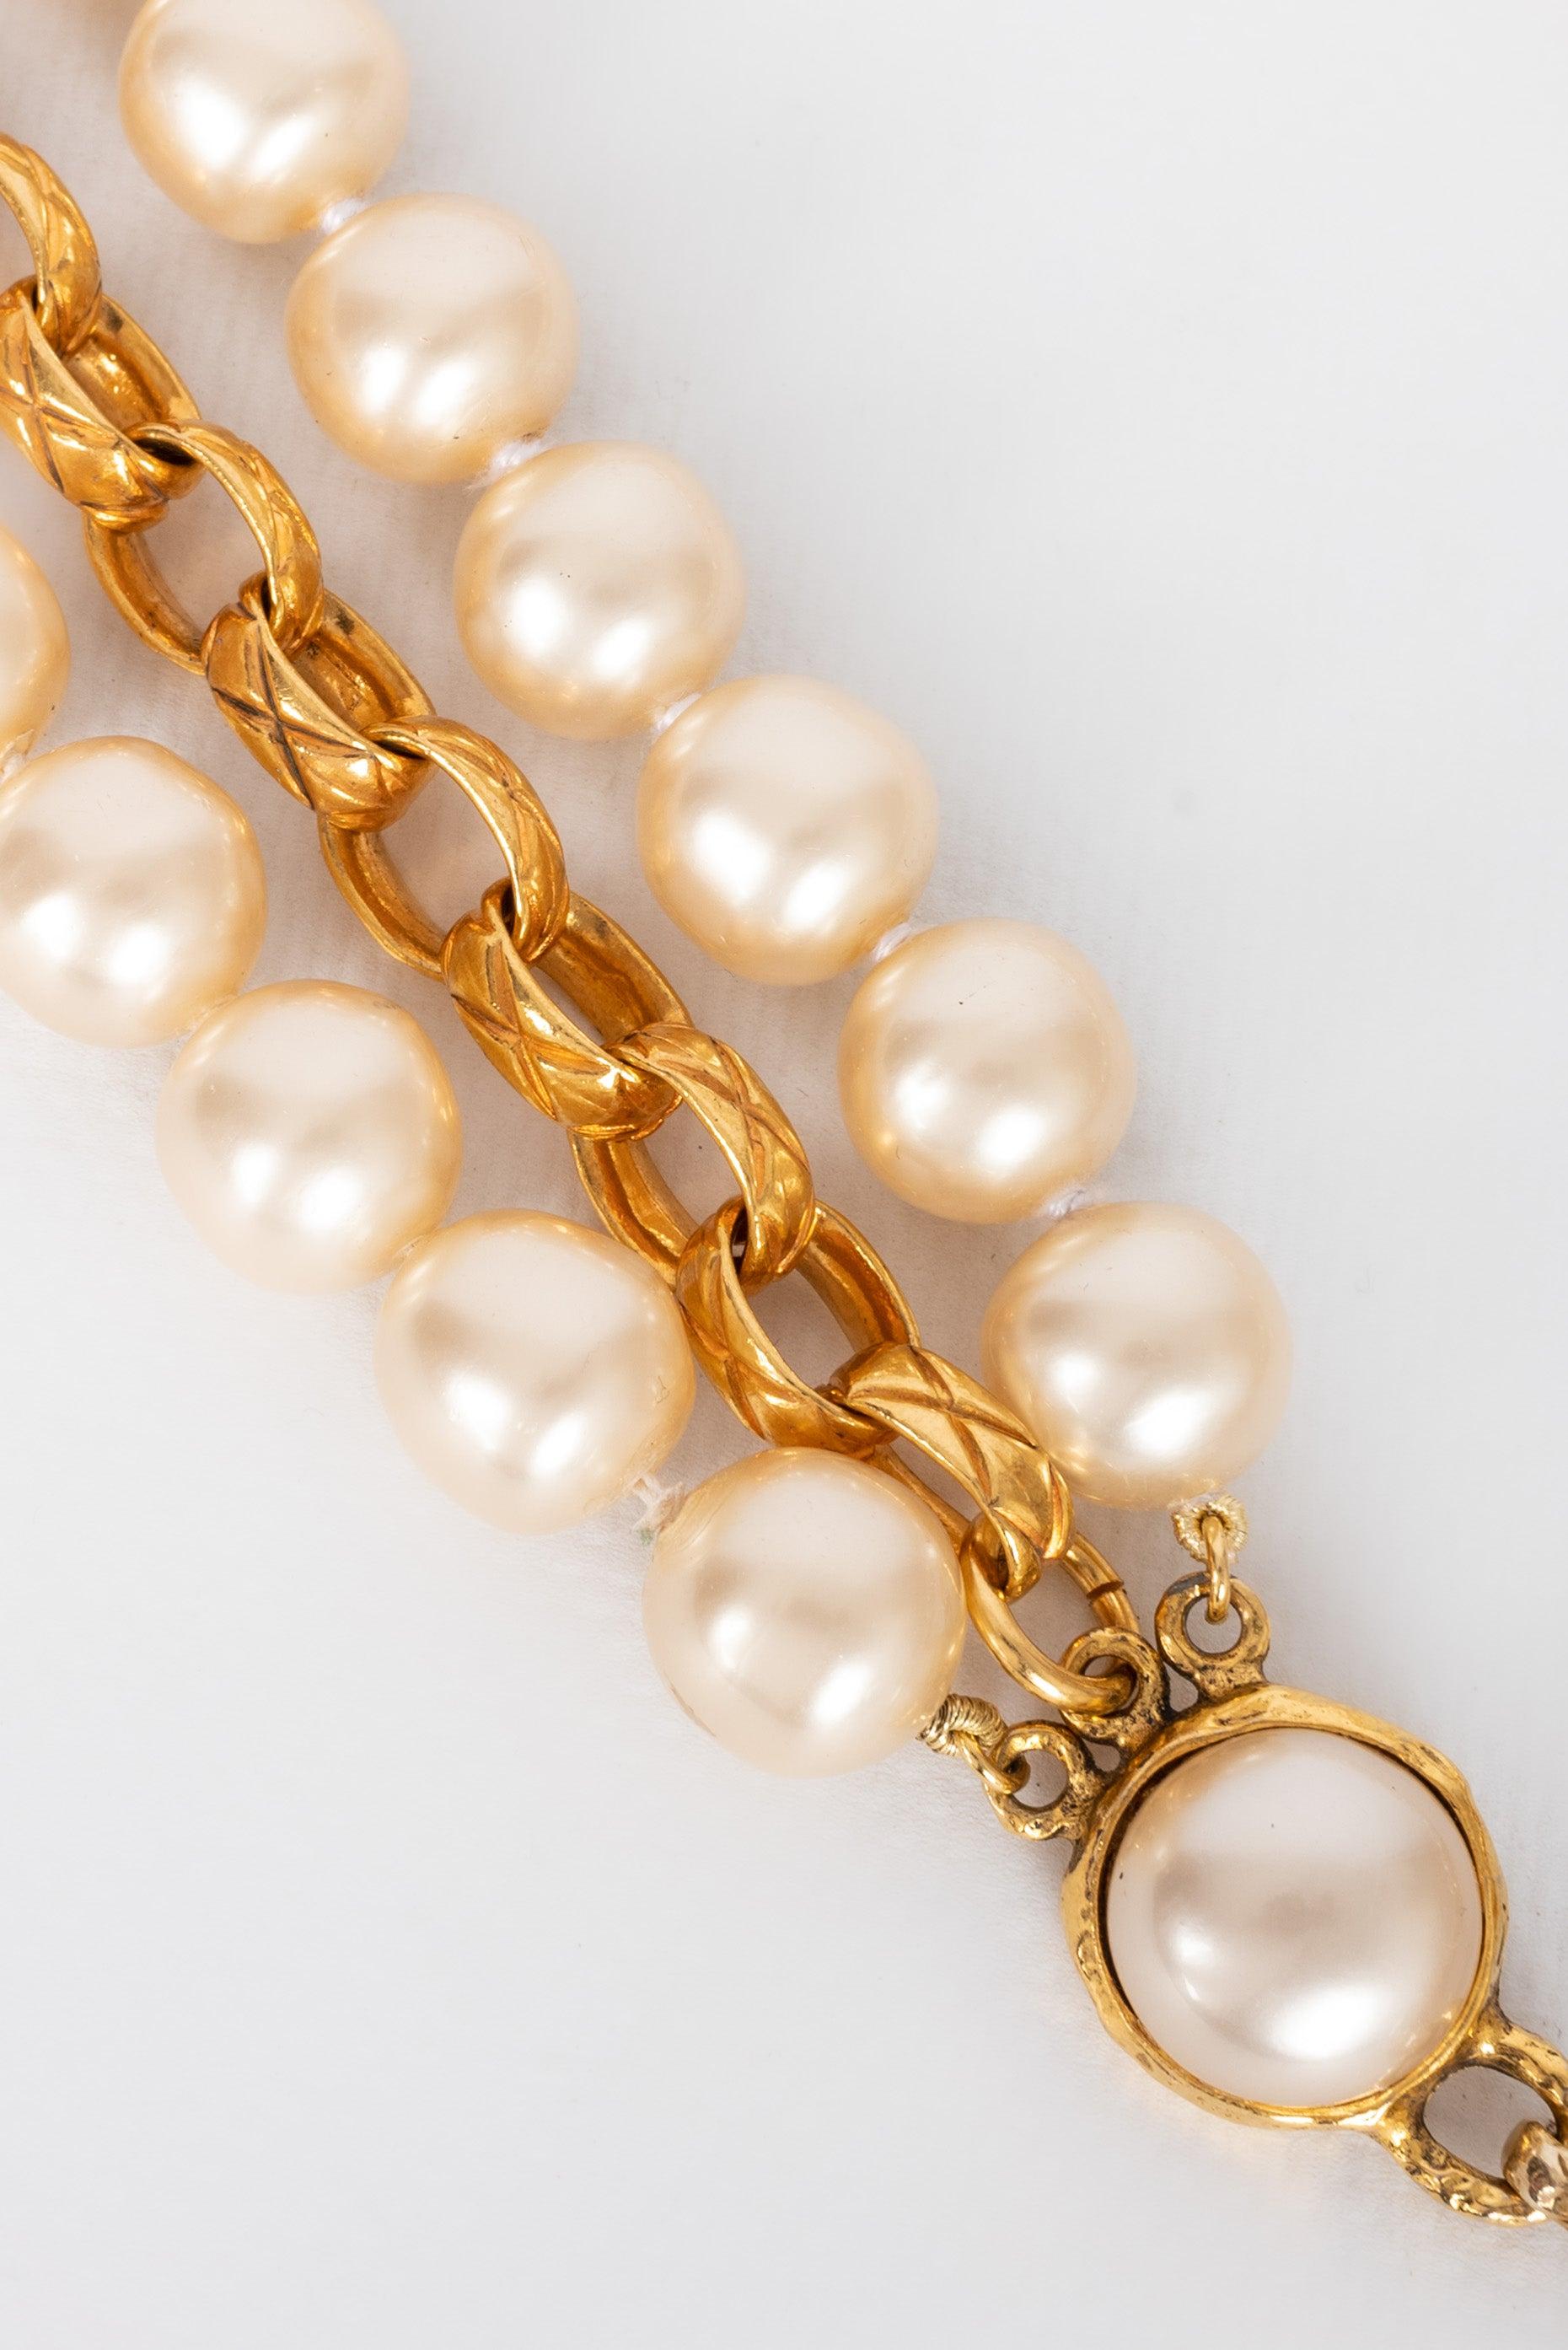 Chanel Necklace in Gold-Plated Metal and Costume Pearly Beads, 1990s For Sale 1